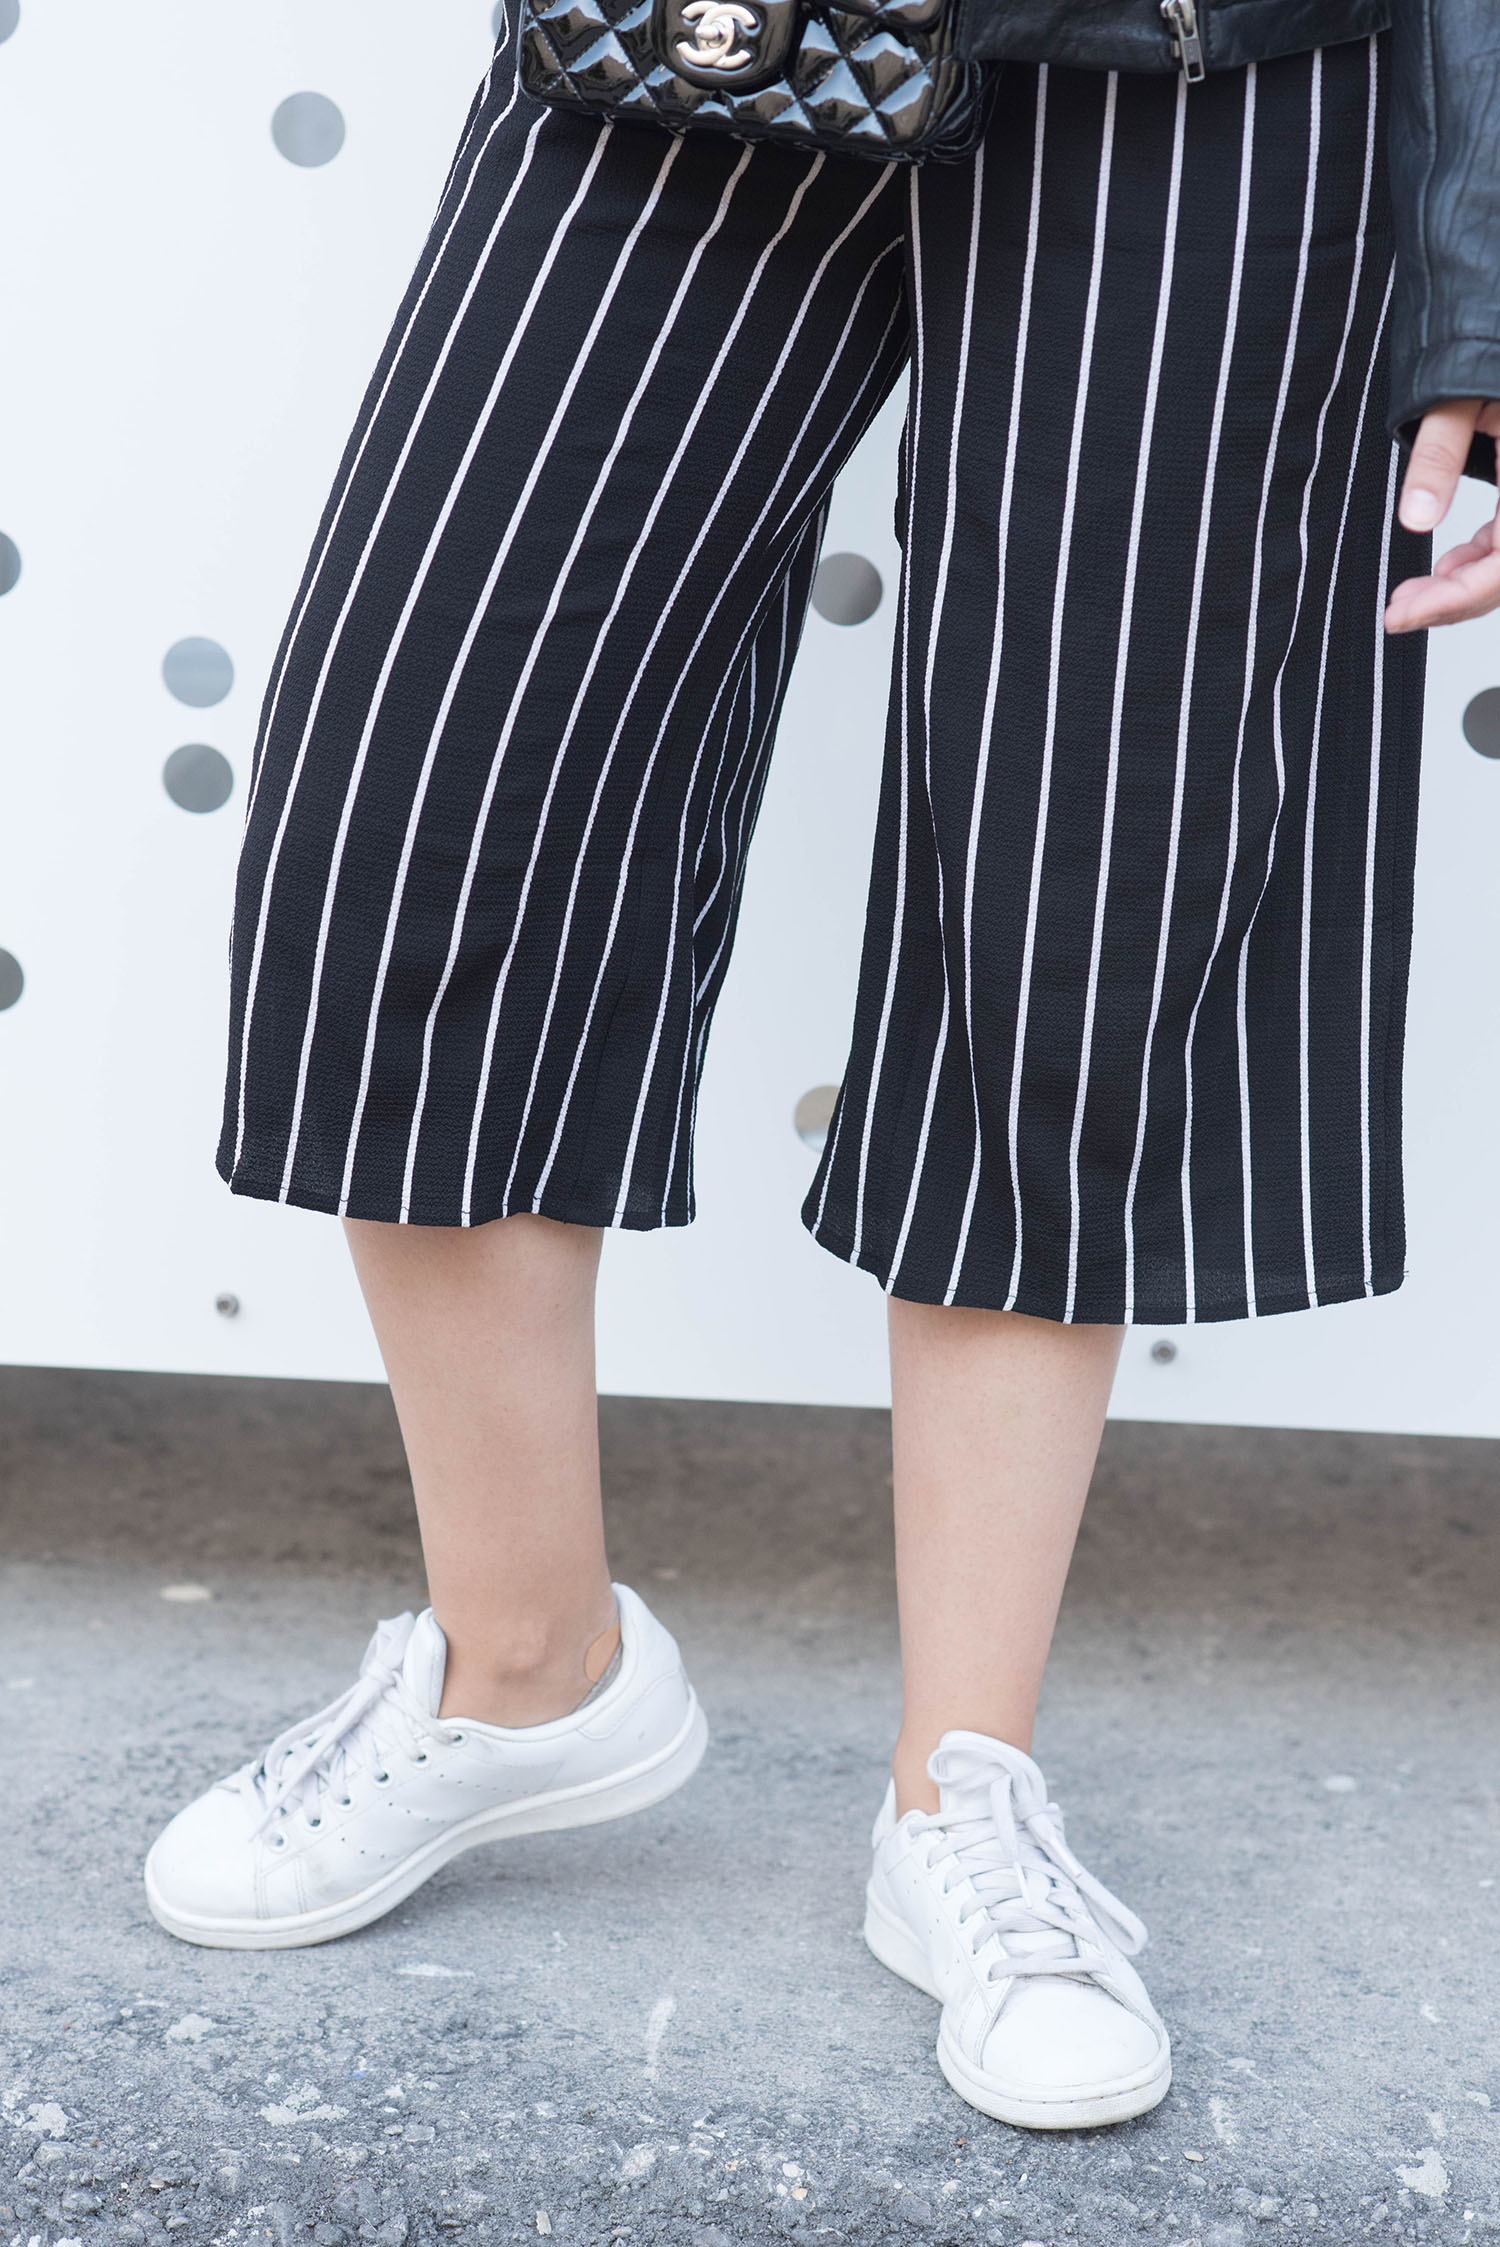 Outfit details on Winnipeg fashion blogger Cee Fardoe of Coco & Vera, wearing a Missy Empire striped jumpsuit, Adidas Stan Smith sneakers and black Chanel extra mini handbag